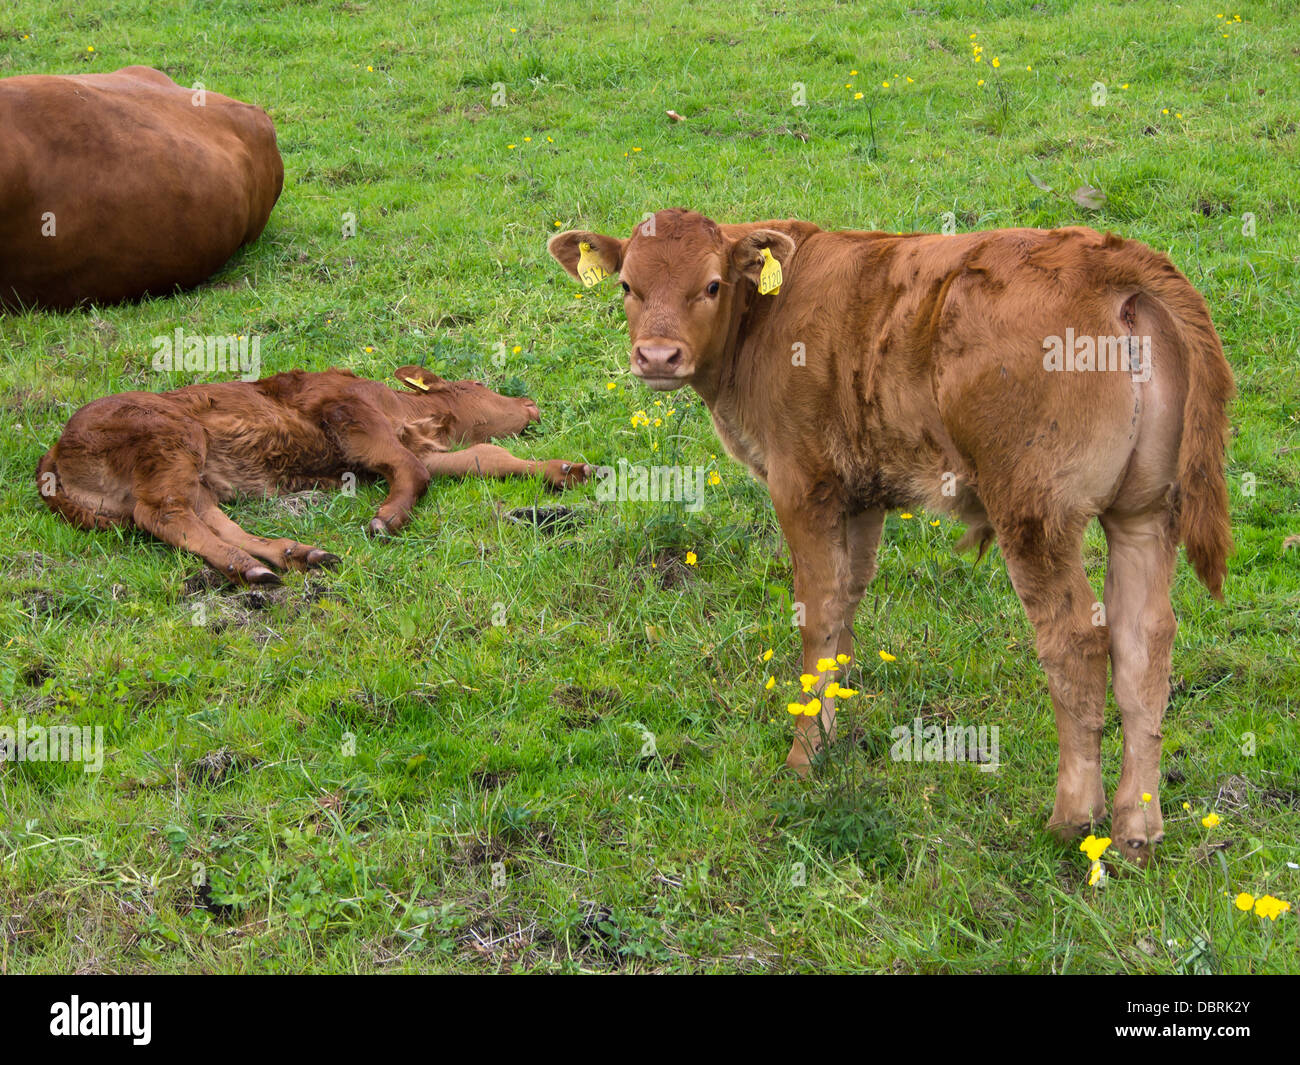 Two medium brown calves on a field outside Stavanger Norway, one resting and one standing earmarkings clearly seen Stock Photo